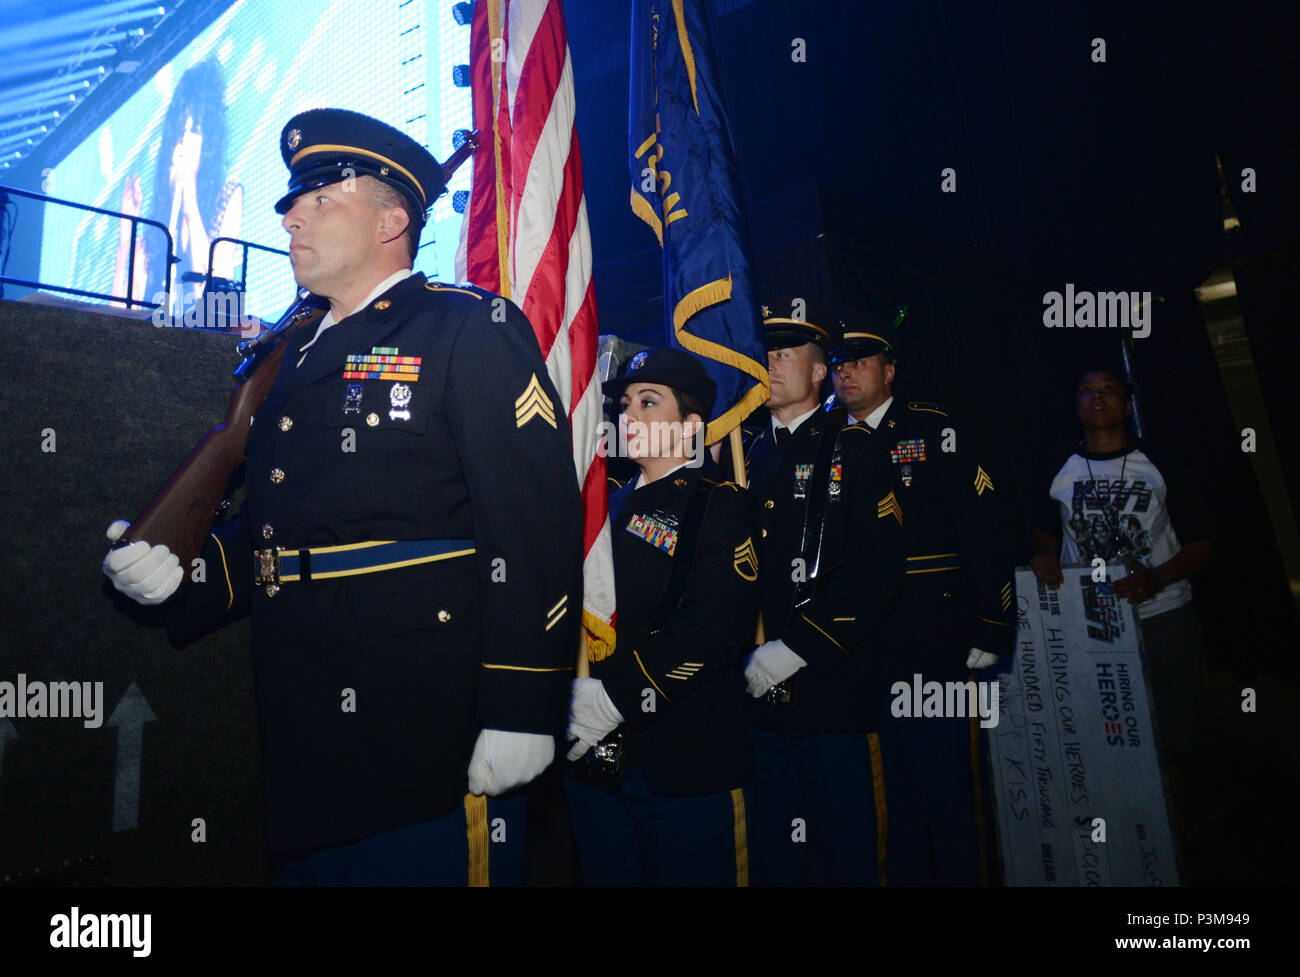 Members of the Oregon Army National Guard prepare to go on stage with the band KISS during the “Freedom to Rock” concert at Matthew Knight Arena in Eugene, Oregon, July 9, 2016. The Oregon National Guard Soldiers displayed the American flag while KISS performed the National Anthem and led the audience in the Pledge of Allegiance during a patriotic tribute to U.S. military and veterans at the concert. From left: Sgt. Jeffrey Cox, of Salem, with Detachment 1, Company A, 1-112th Aviation; Staff Sgt. Valerie Dean, of Salem, with Joint Force Headquarters; Sgt. Jerald Bone, of Newport, with Detachme Stock Photo